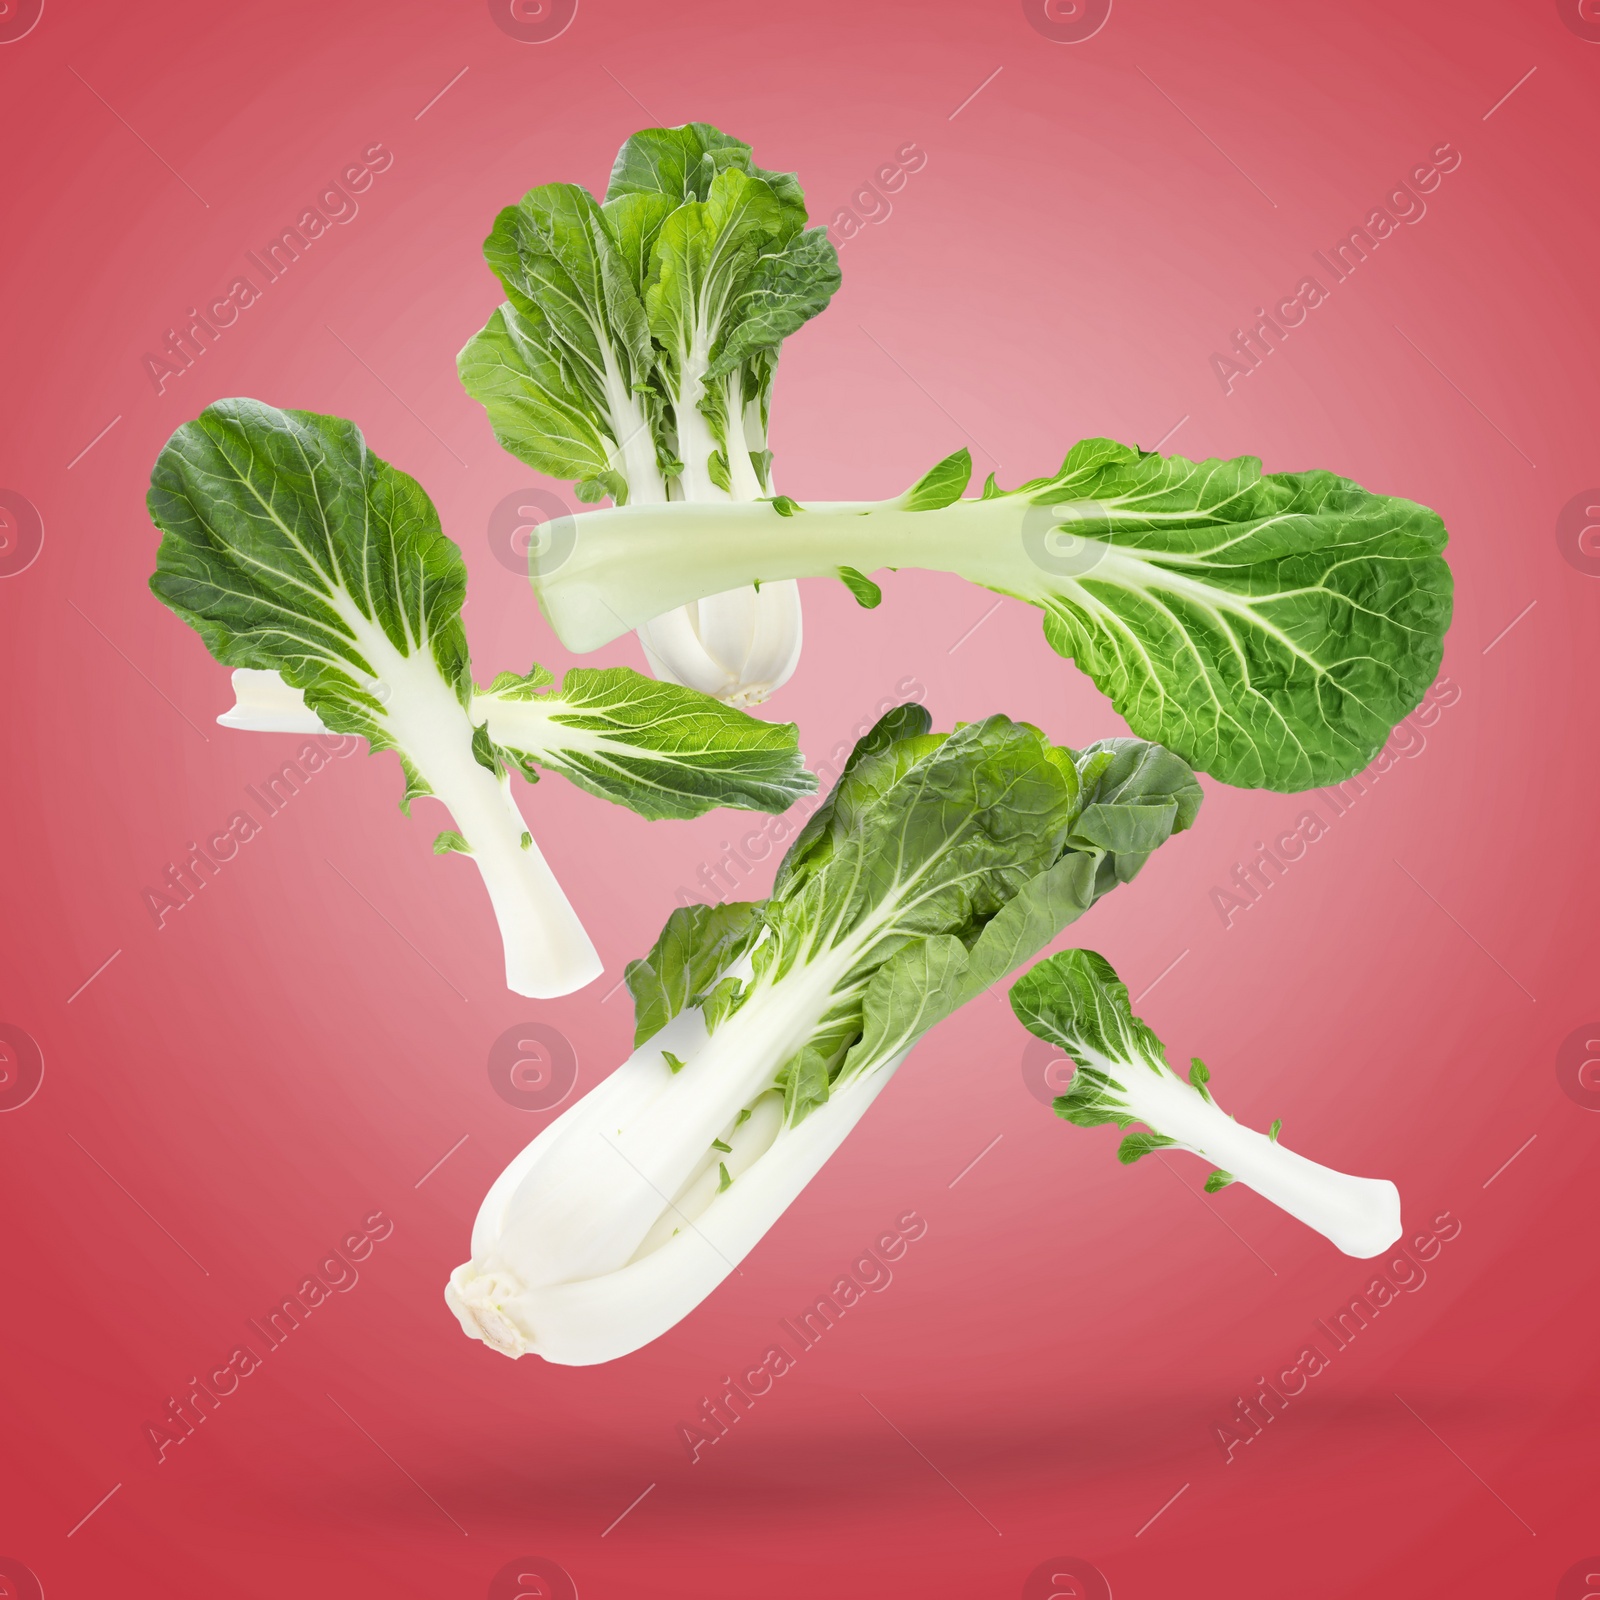 Image of Fresh green pak choy cabbages falling on red background